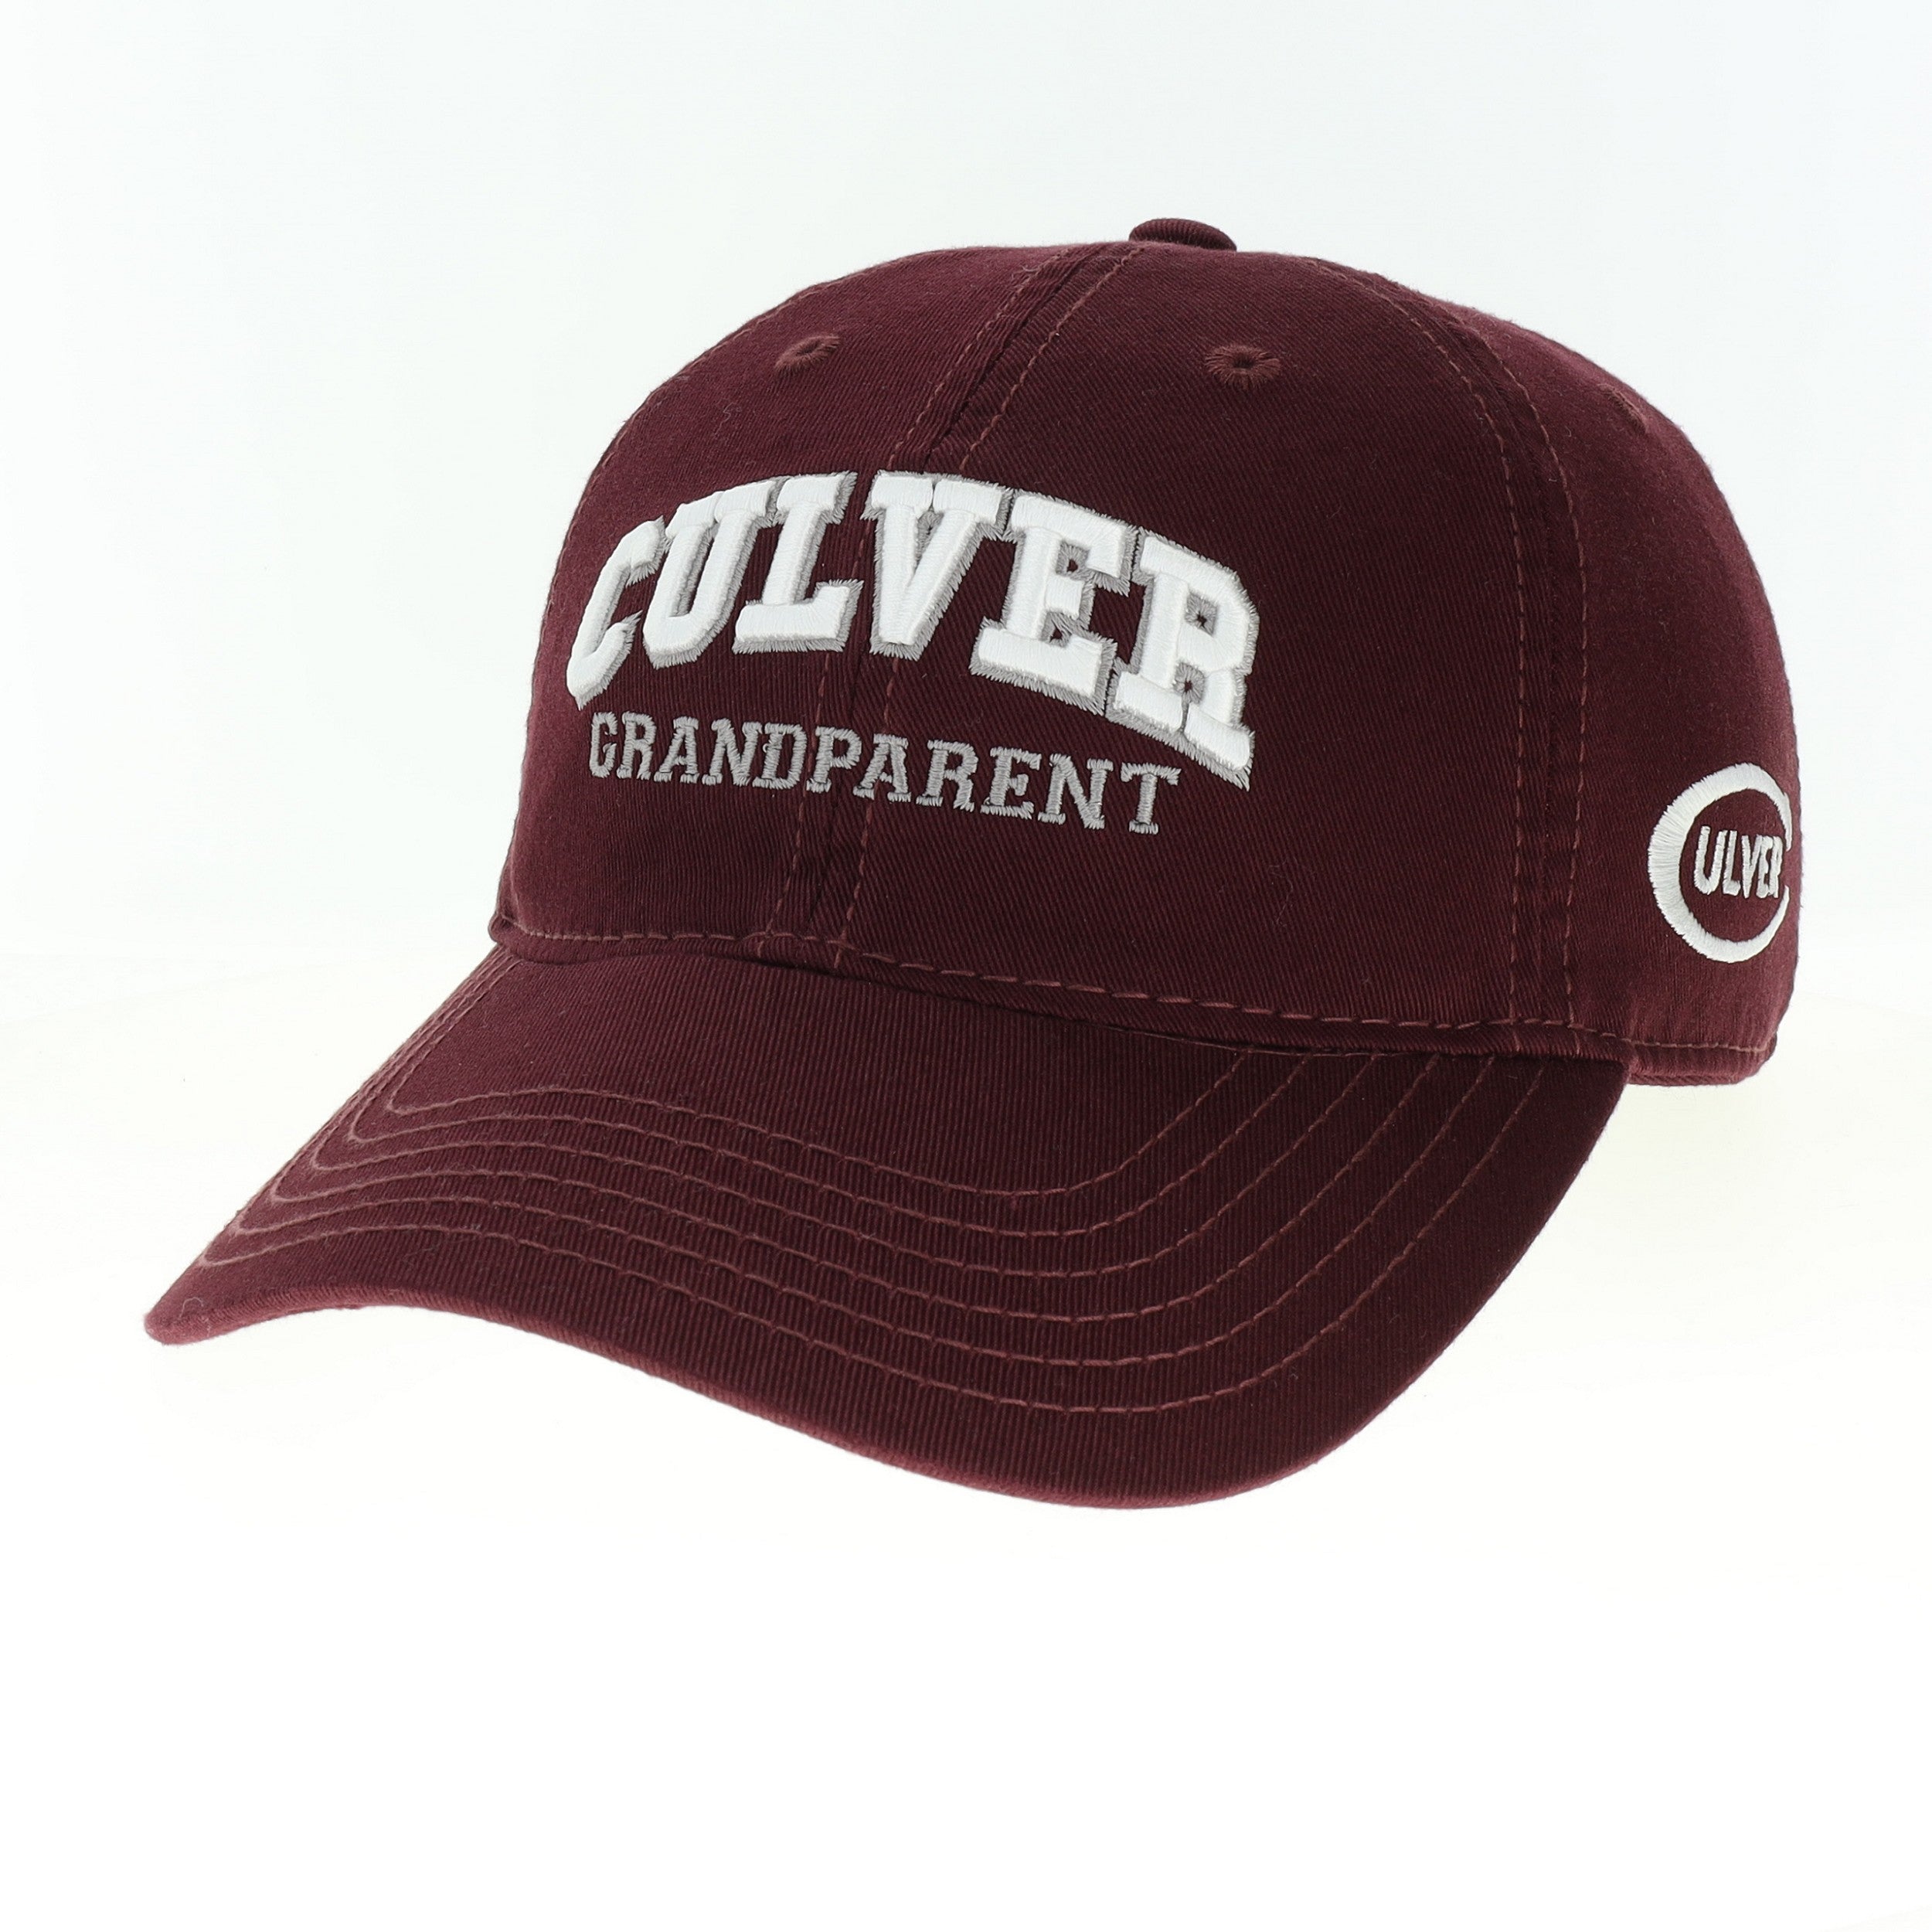 Grandparent Relaxed Twill Adjustable Hat - Maroon